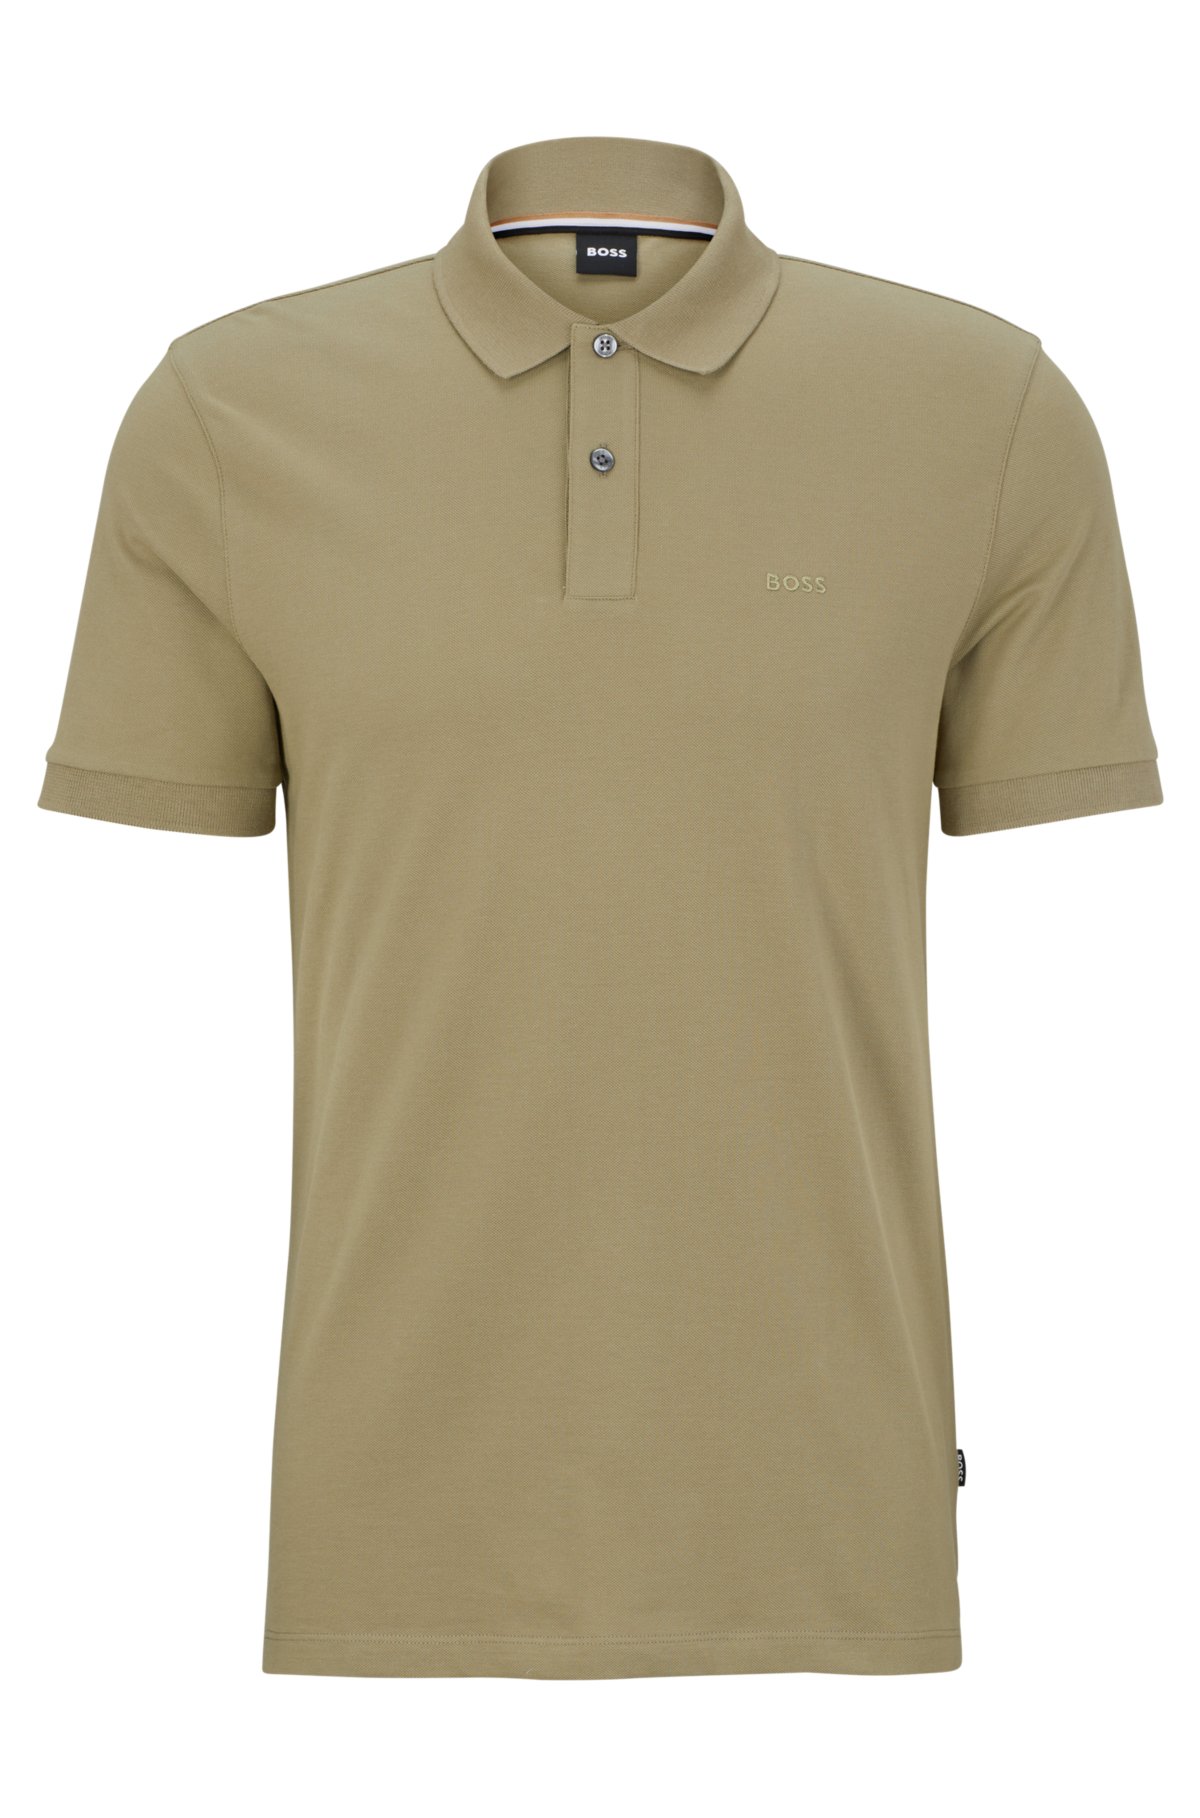 polo BOSS - logo Cotton with shirt embroidered